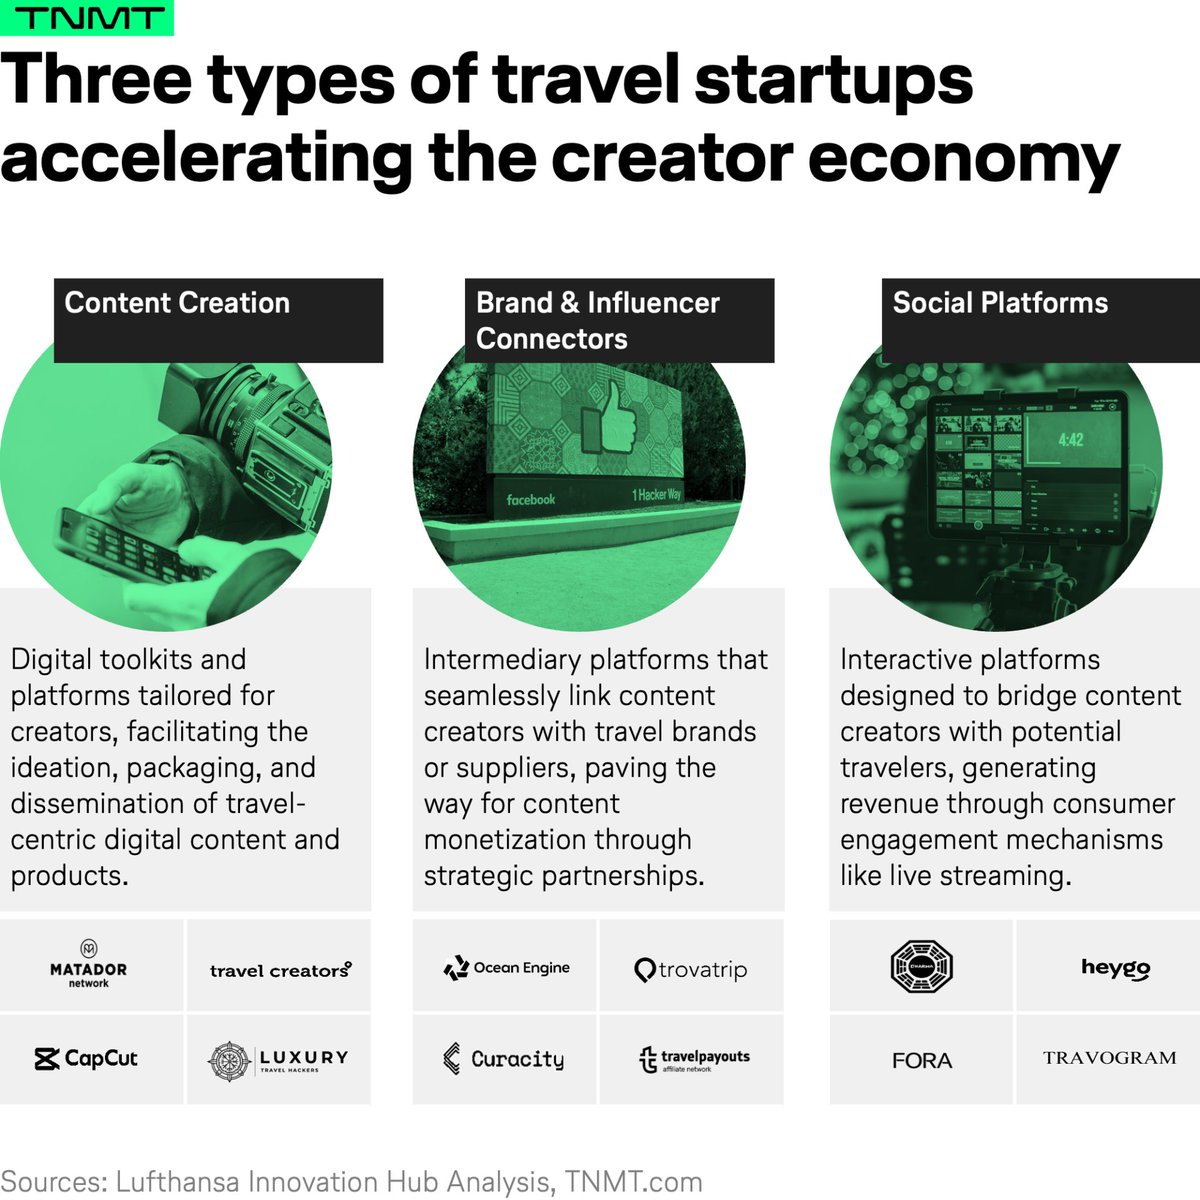 Startups at the confluence of creation and travel via TNMT 

#content #digital #travel #hotels #airlines #marketing #travelmarketing #hotelmarketing #social #socialmedia #Instagram